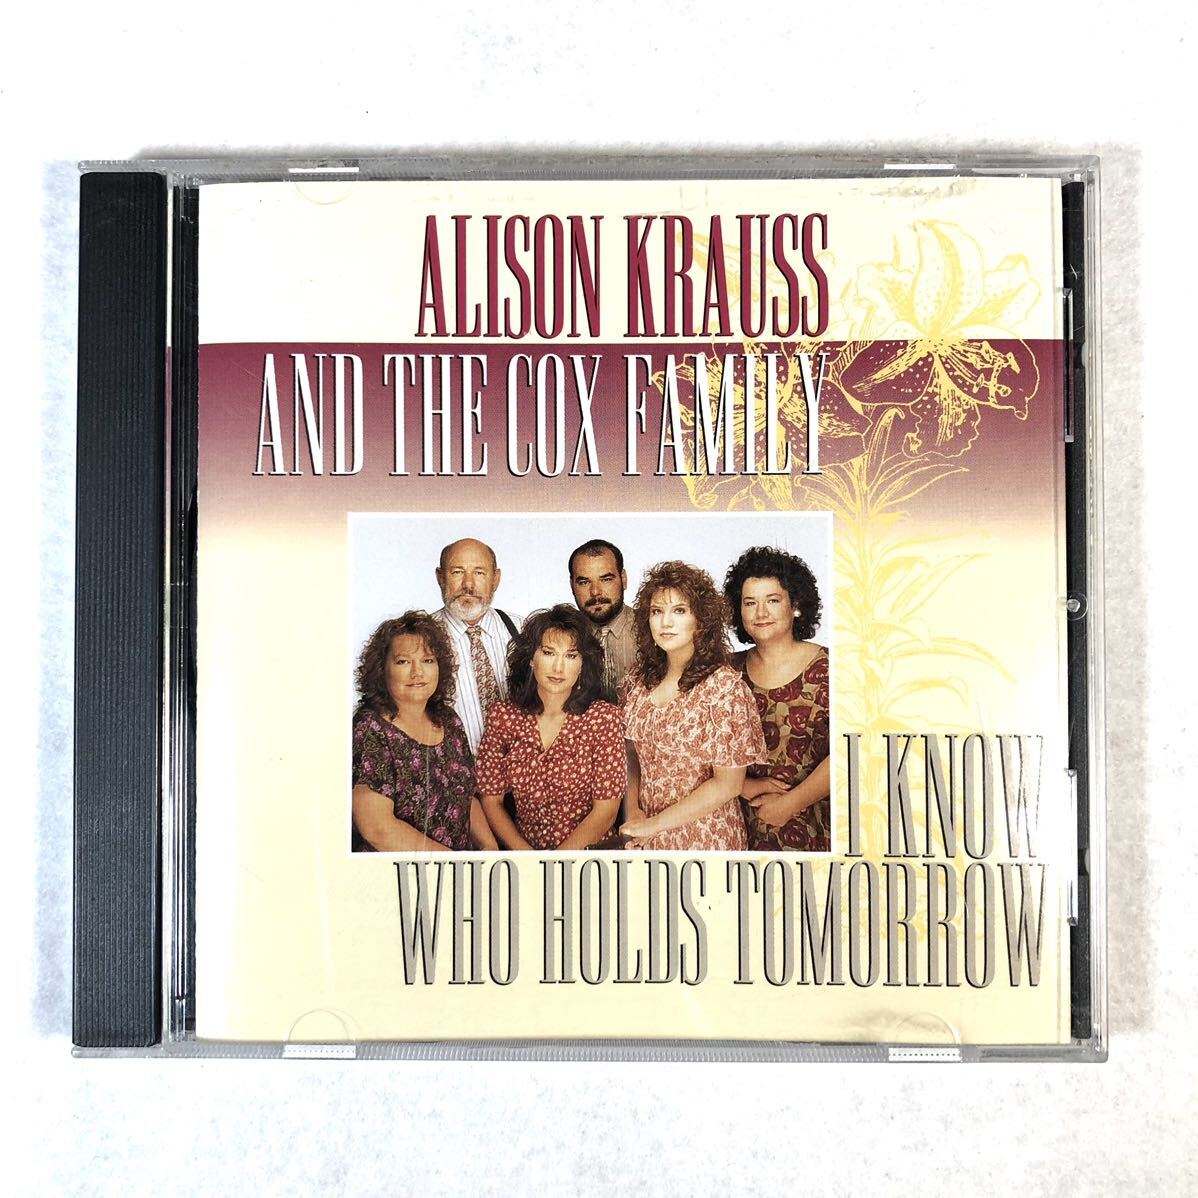 m324 US盤 CD【ALISON KRAUSS AND THE COX FAMILY /I KNOW WHO HOLDS TOMORROW】アリソン・クラウスとザ・コックス・ファミリーの画像1